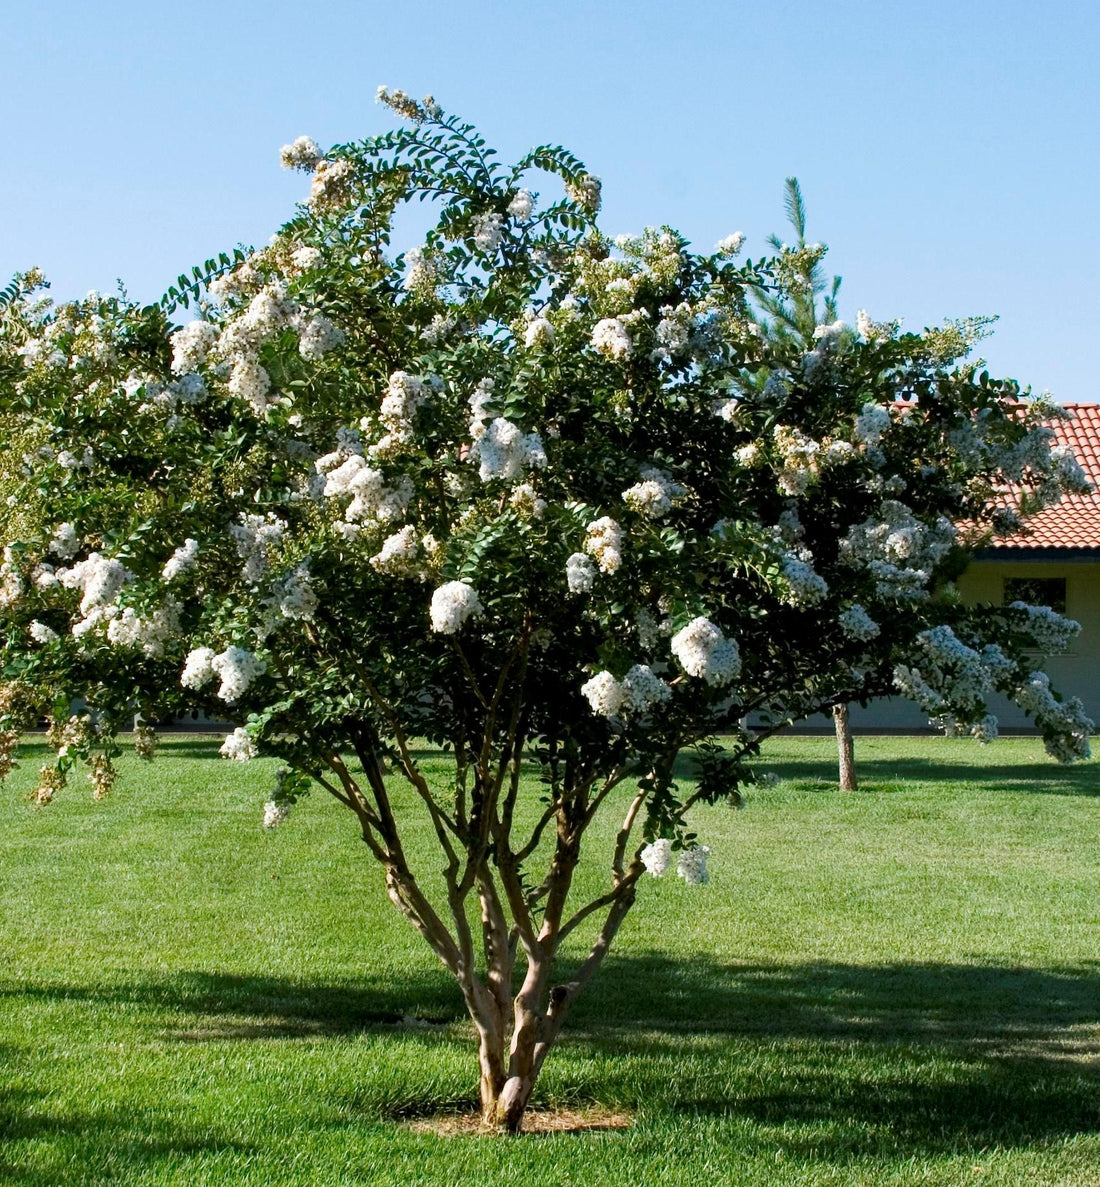 Acora White Crape Myrtle, Georgeous Clusters of Pure White, Crinkled Flowers, Amazing Dwarf Crape Mrytle